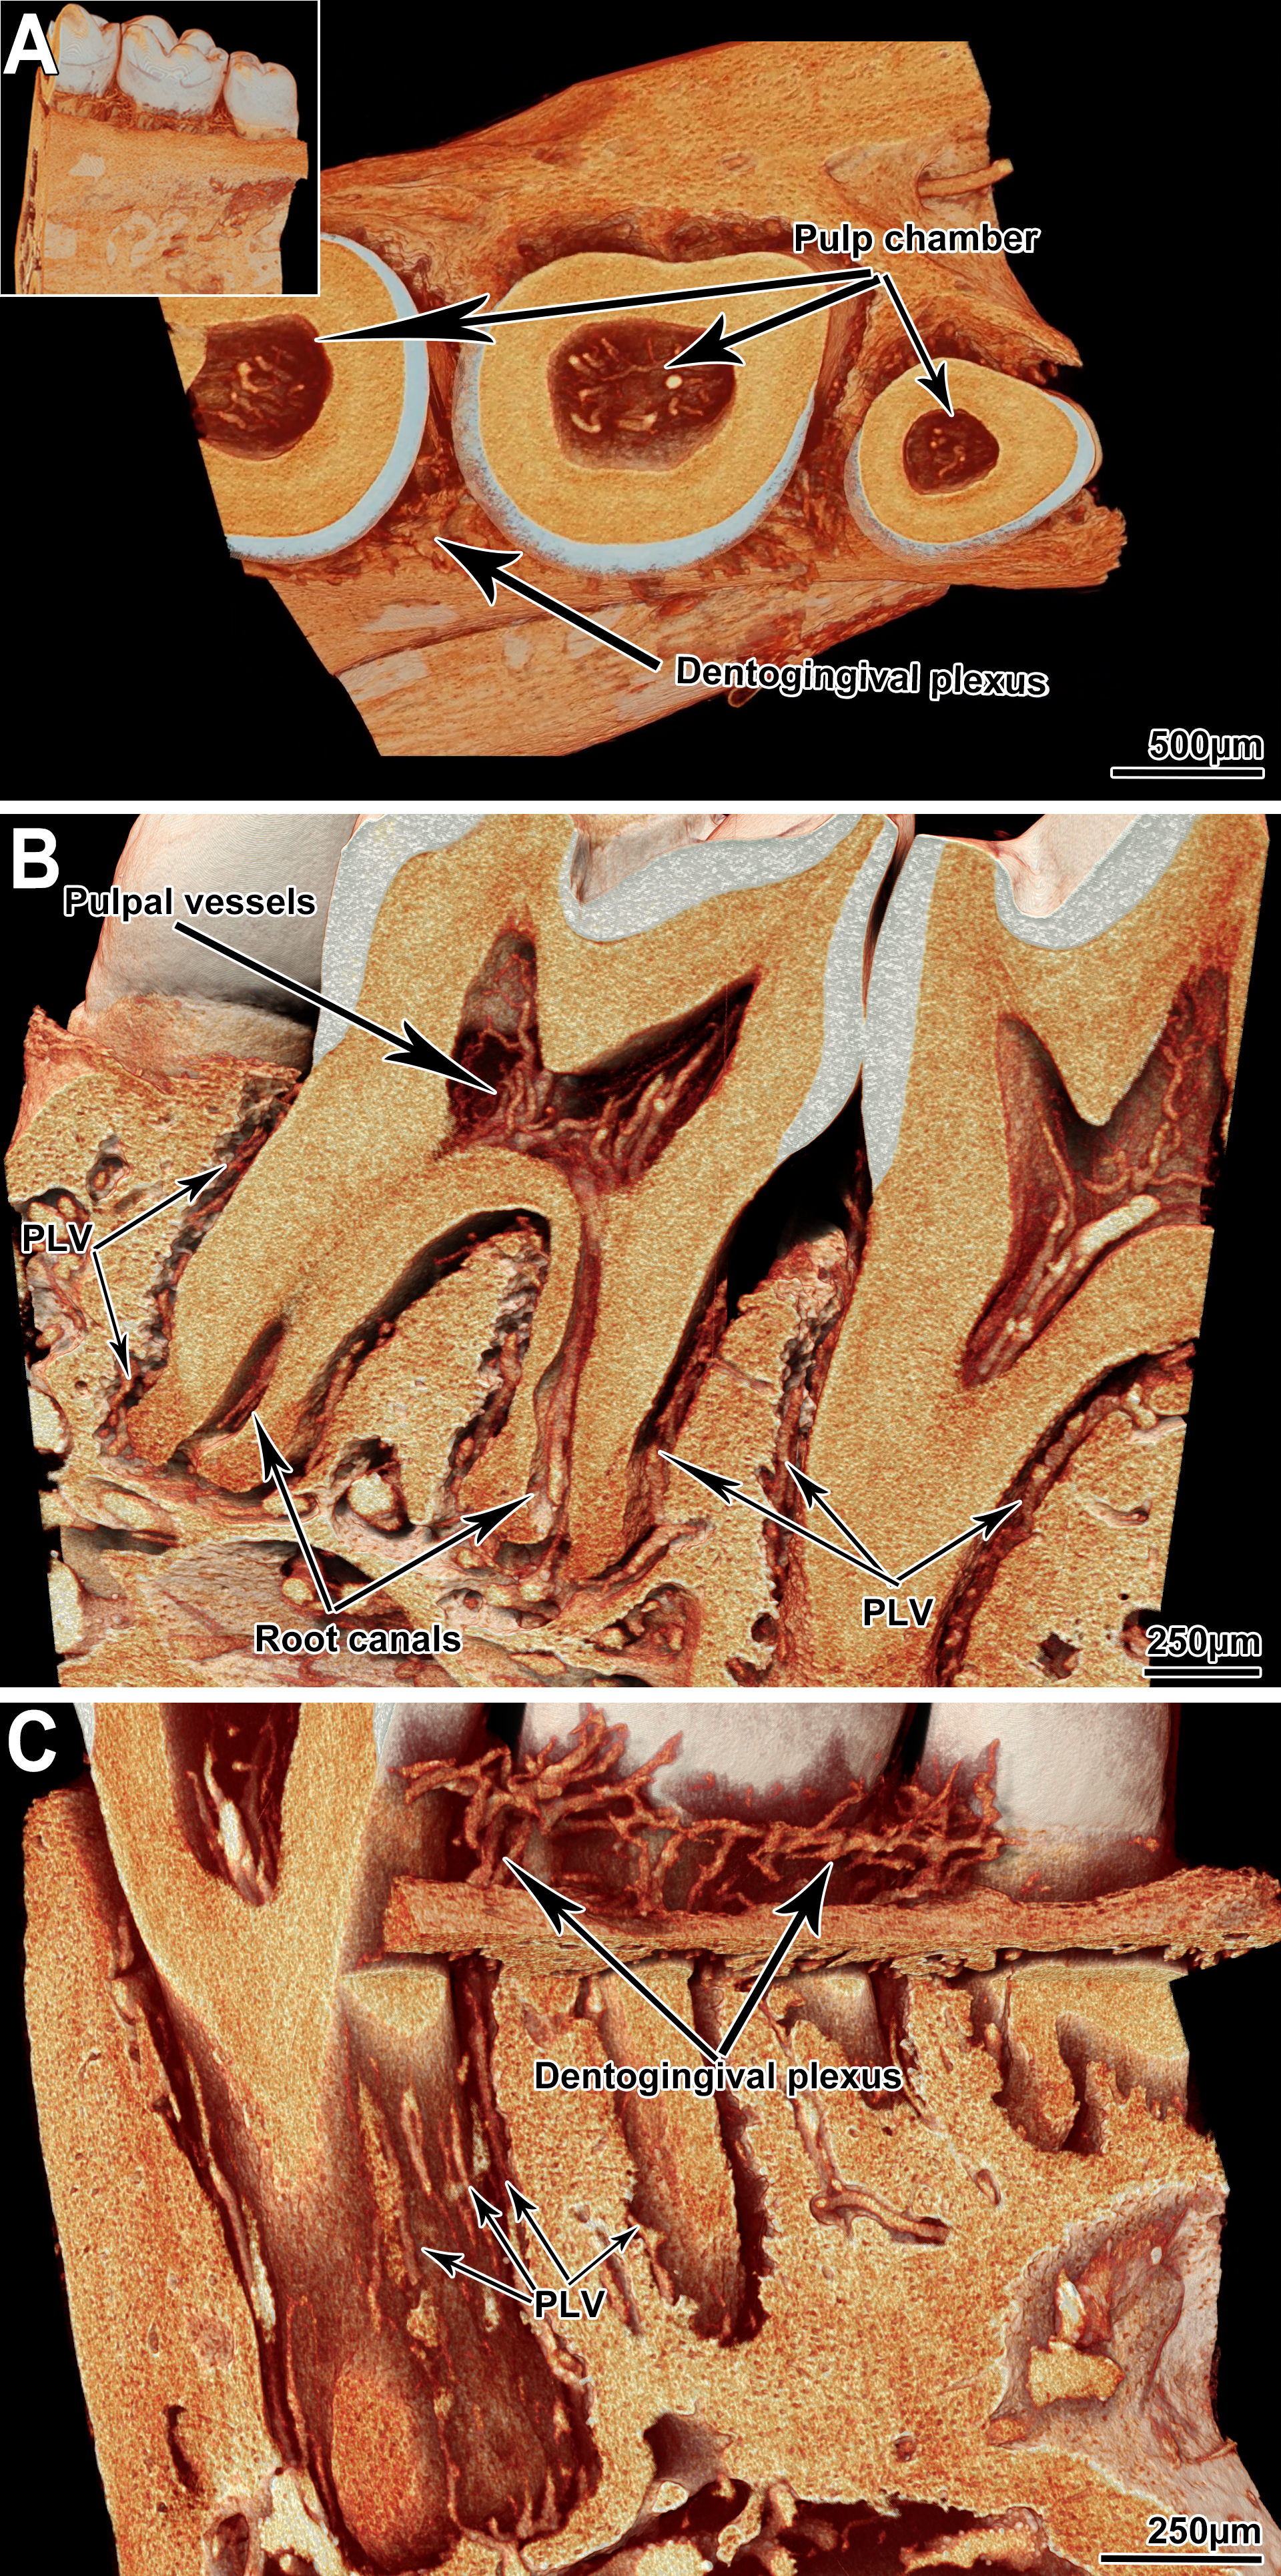 Figure 4: microangioCT of the vasculature of C57BL/6 mice teeth. A: View onto a virtual section parallel to the crowns of the murine teeth: pulp chambers are visible, and the pulpal vessels are presented. The inset shows an full view of the tomographic dataset. B: Sagittal section through the mandible. The microvessels within the pulp cavities and root canals are distinguishable. C: Detailed view of the dentogingival plexus and periodontal ligament vessels (PLV).